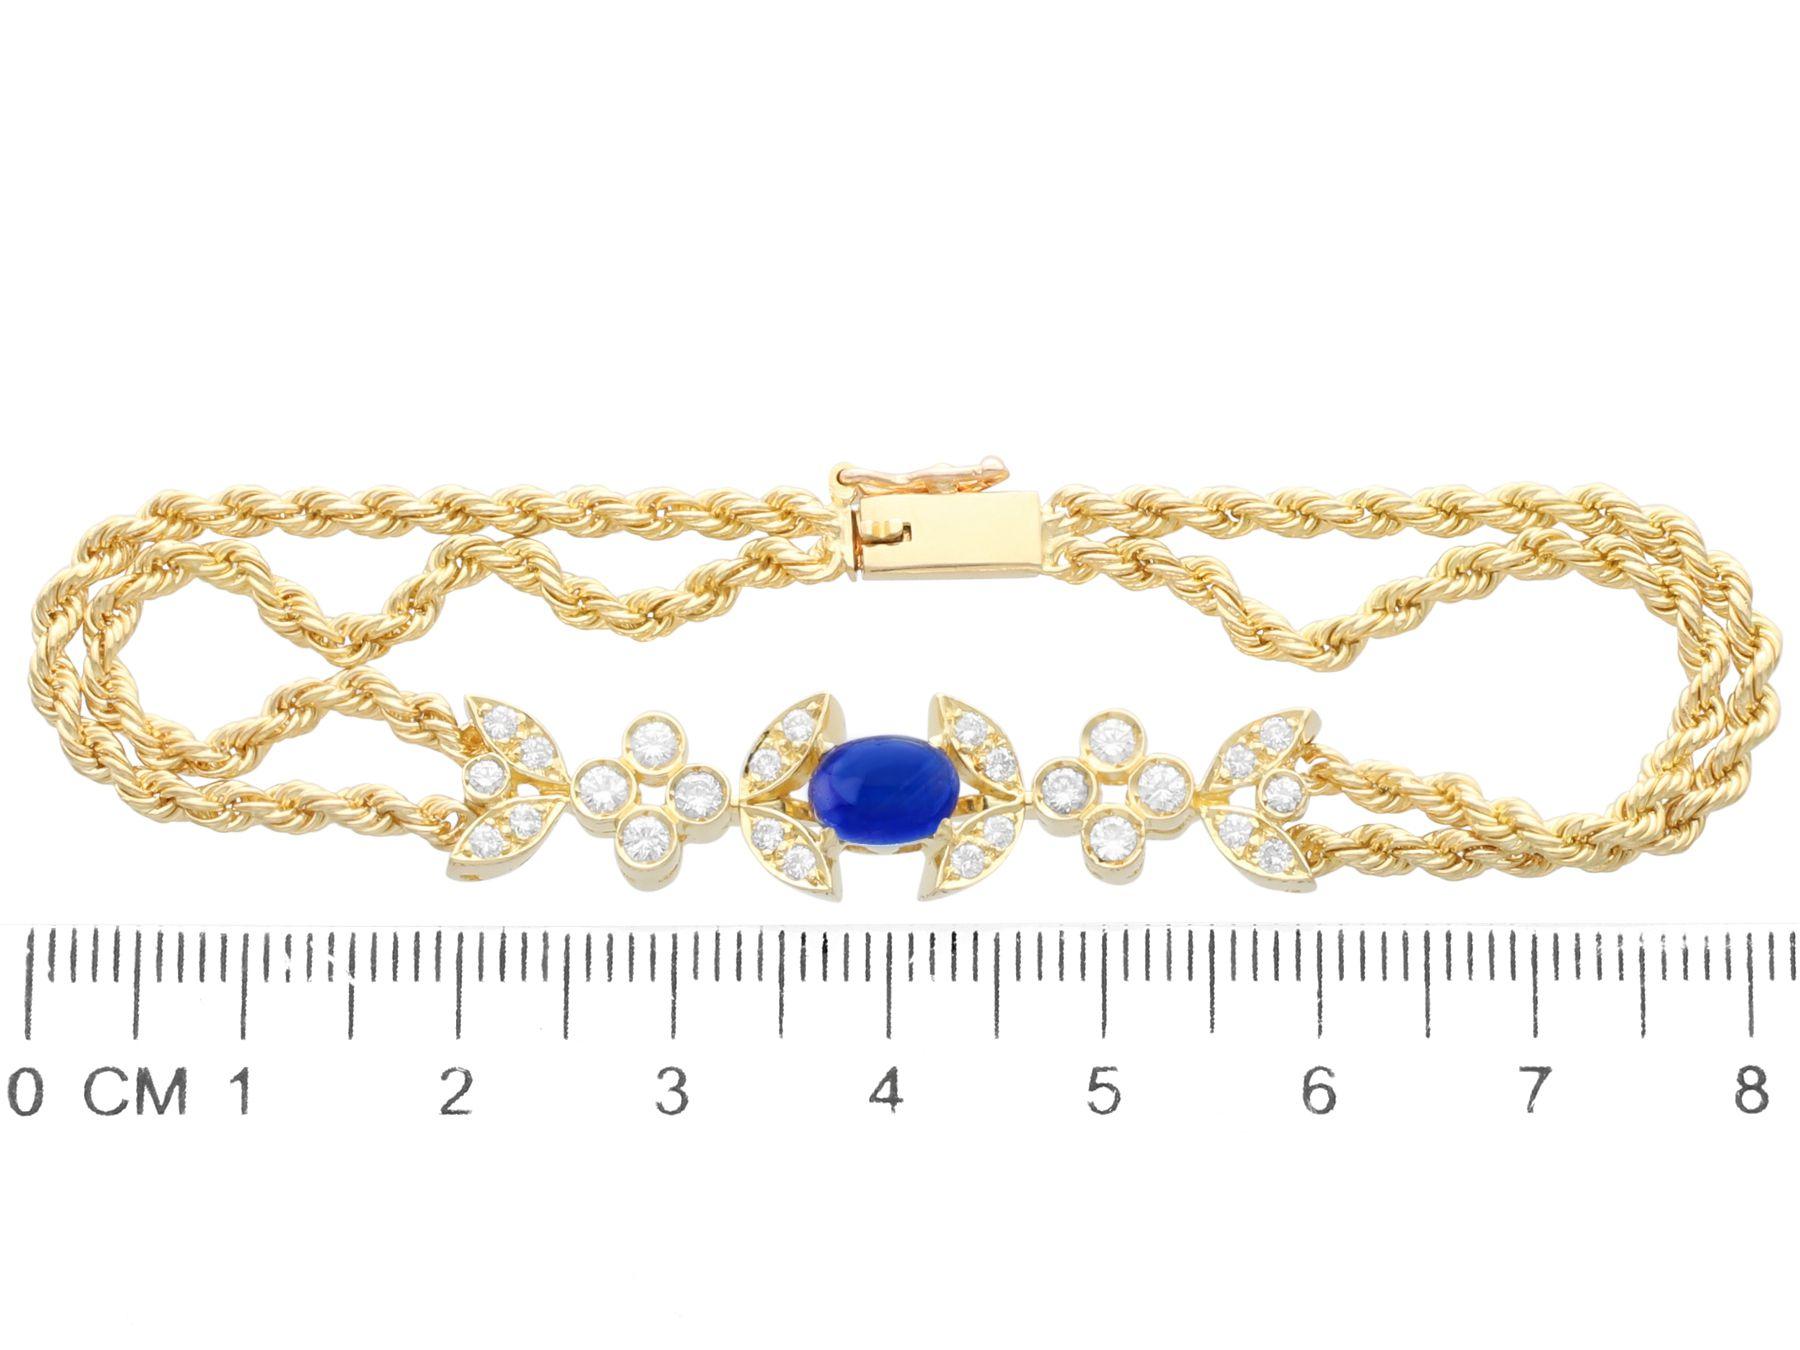 Vintage French 1.30ct Sapphire and Diamond Yellow Gold Bracelet, circa 1940 For Sale 1